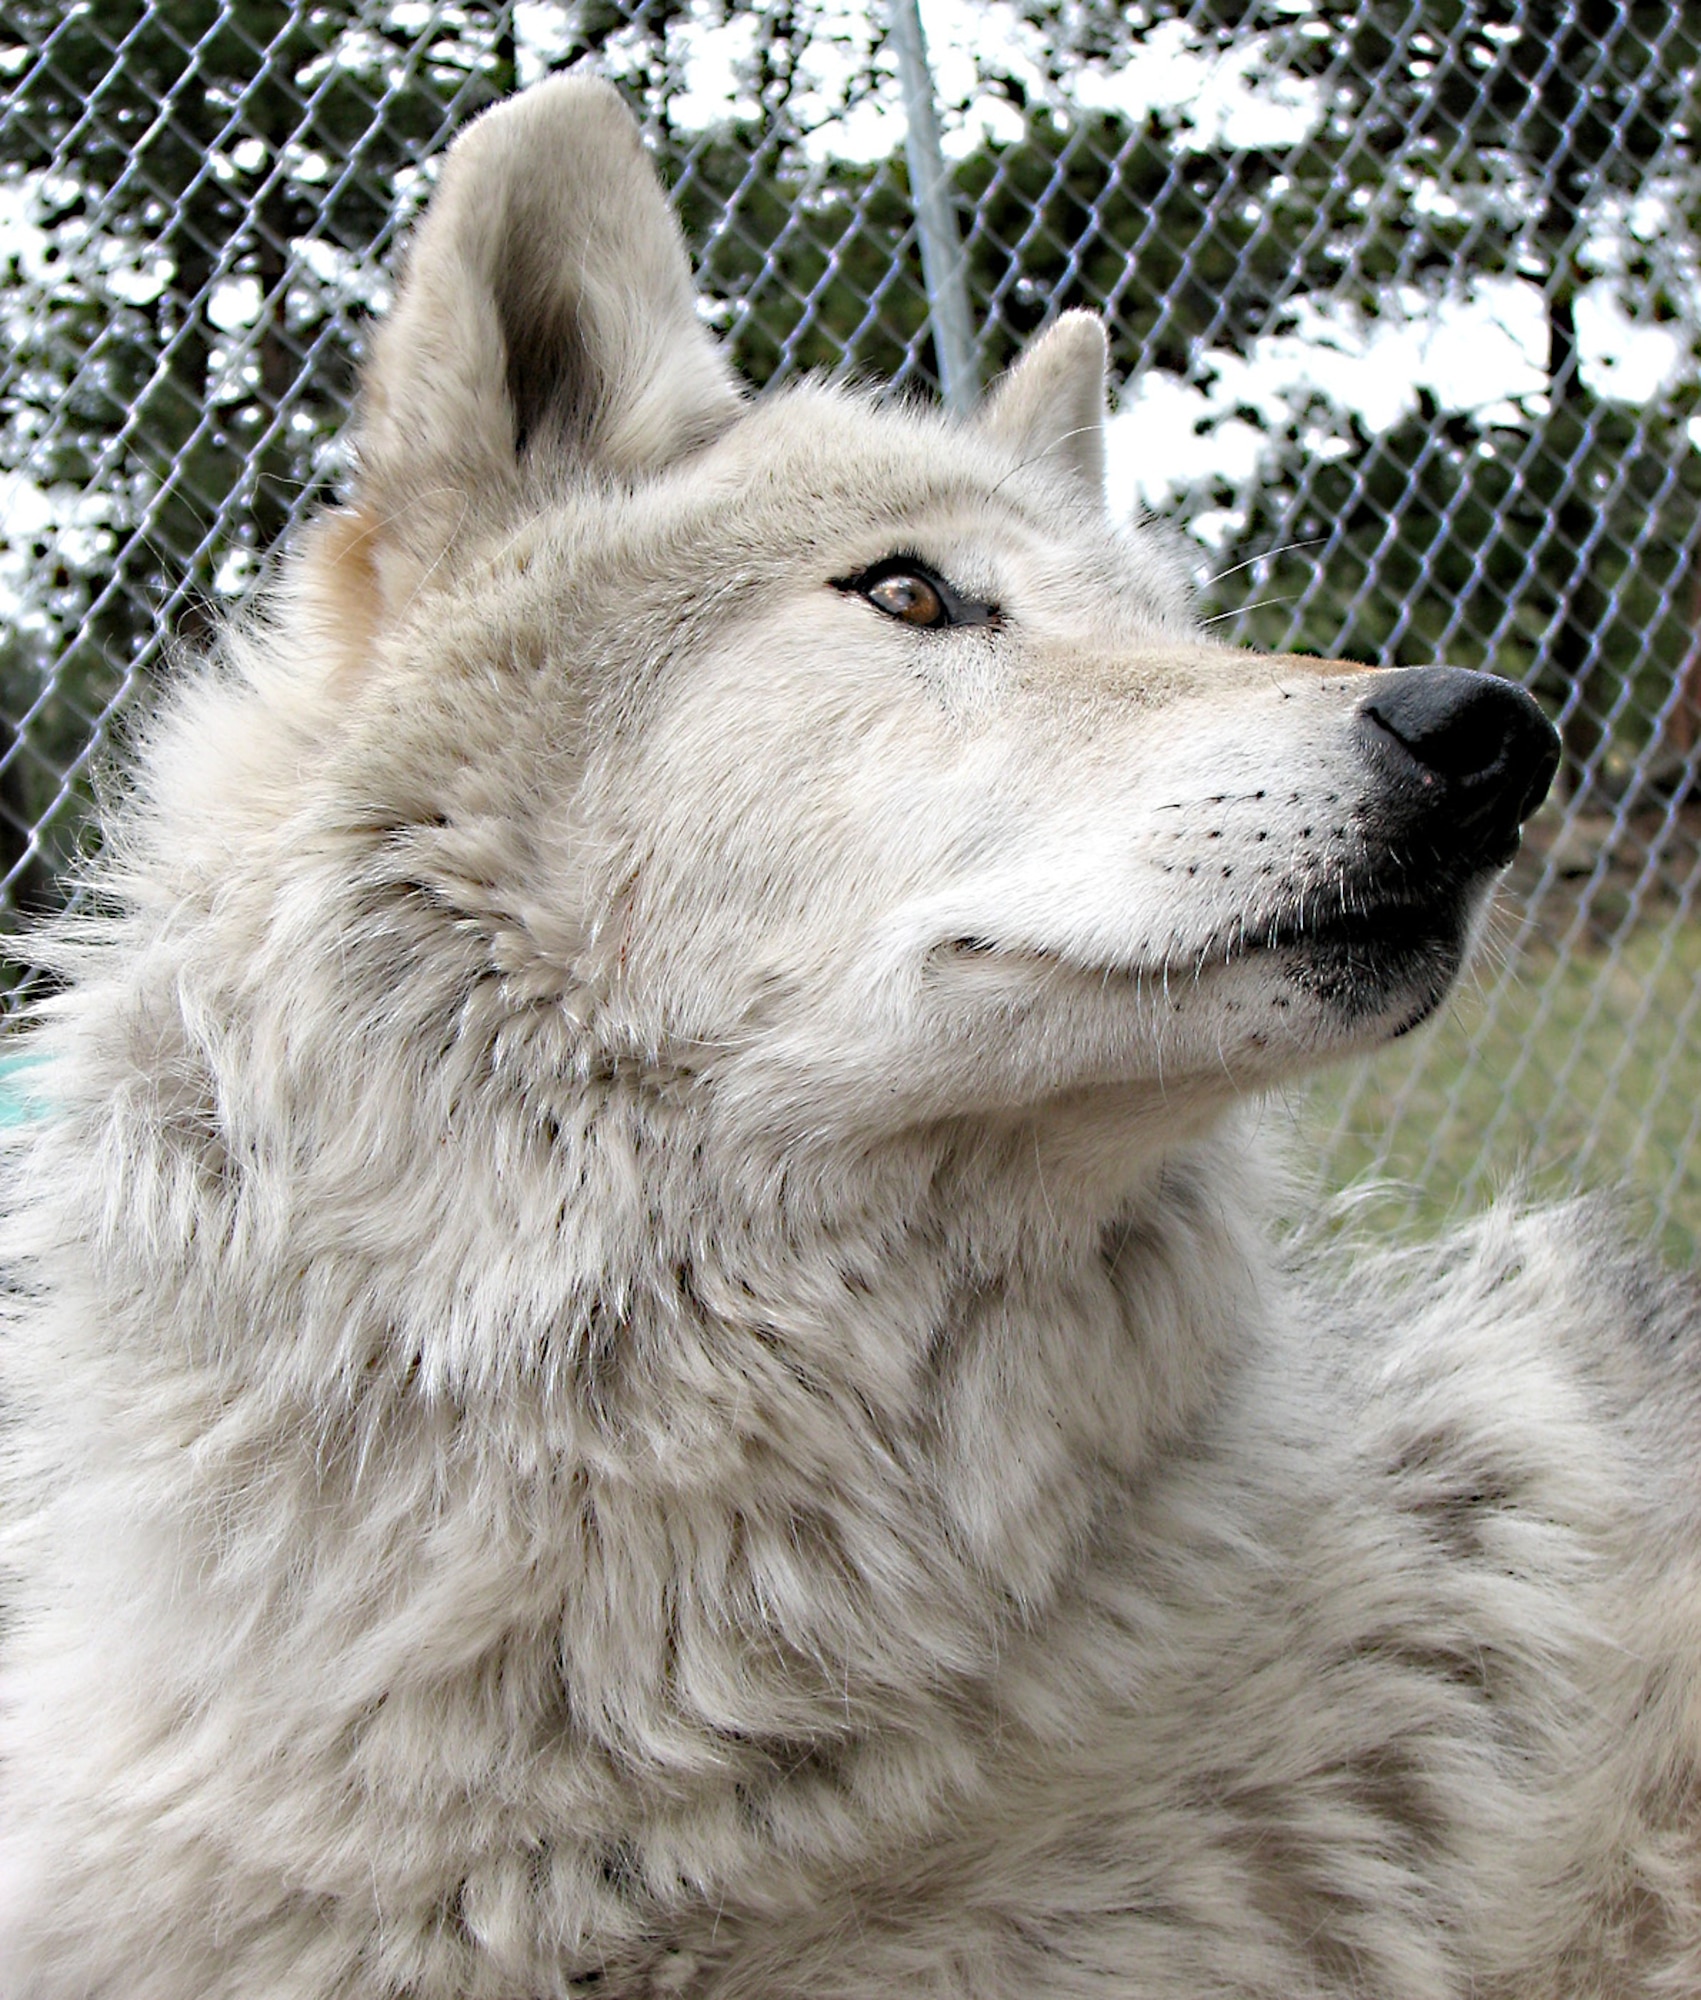 For more on Cheyenne, visit https://wisionswestart.com (Photo by Sharry Akin). 